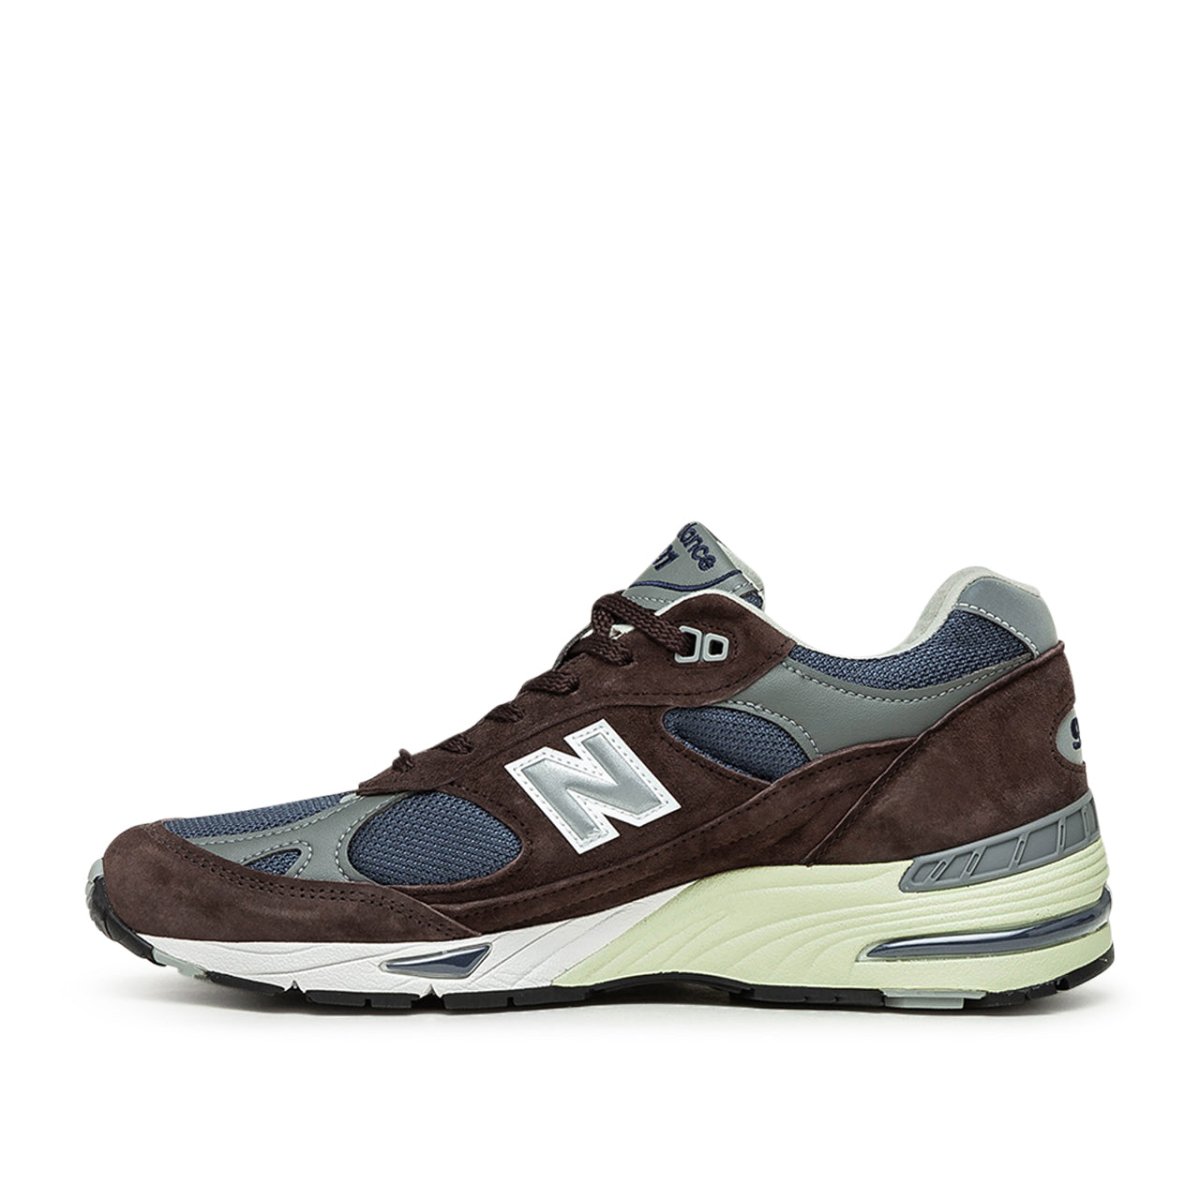 New Balance M991BNG 'Made in England' (Braun / Navy)  - Allike Store